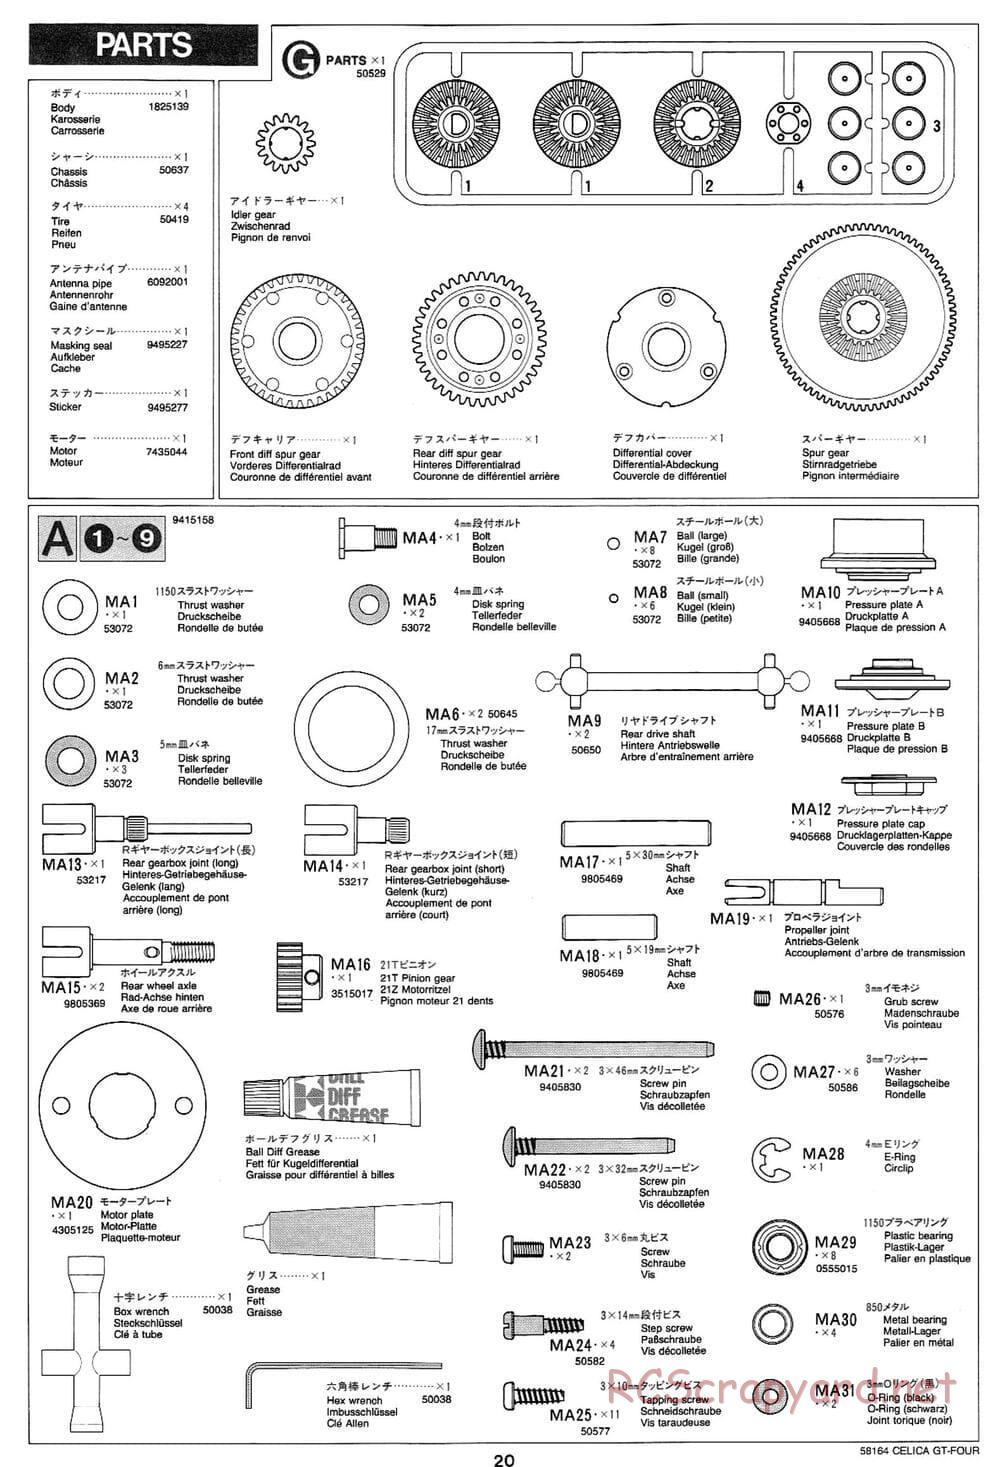 Tamiya - Toyota Celica GT Four - TA-02 Chassis - Manual - Page 21